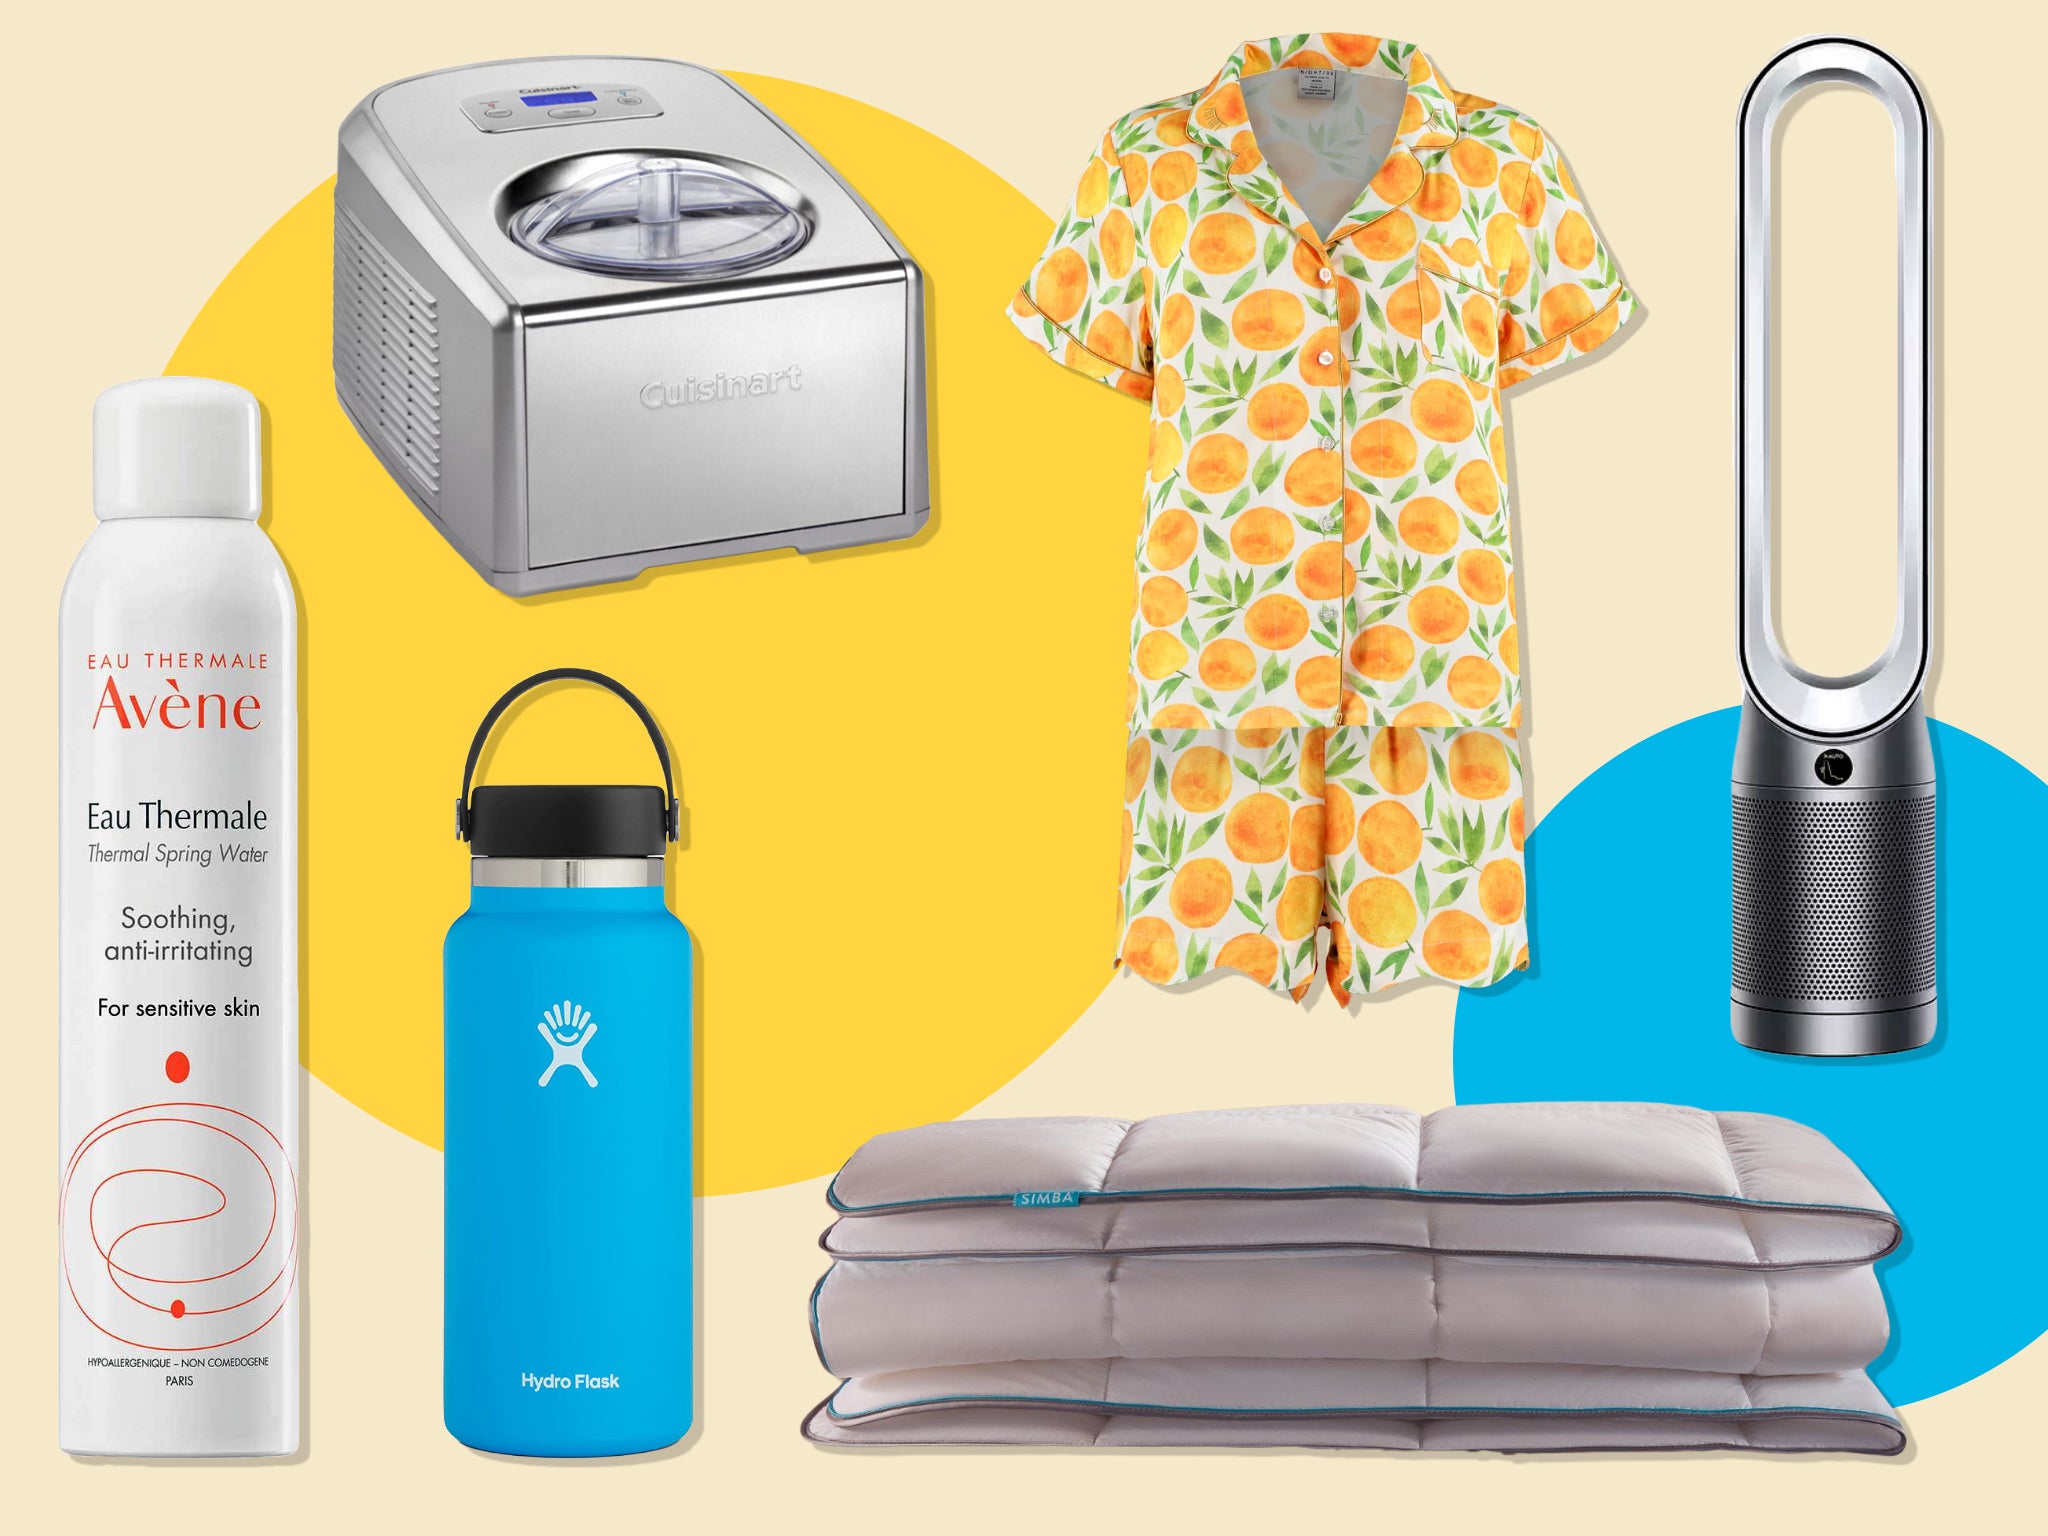 From fans to bedding, these are our recommendations for everything you need